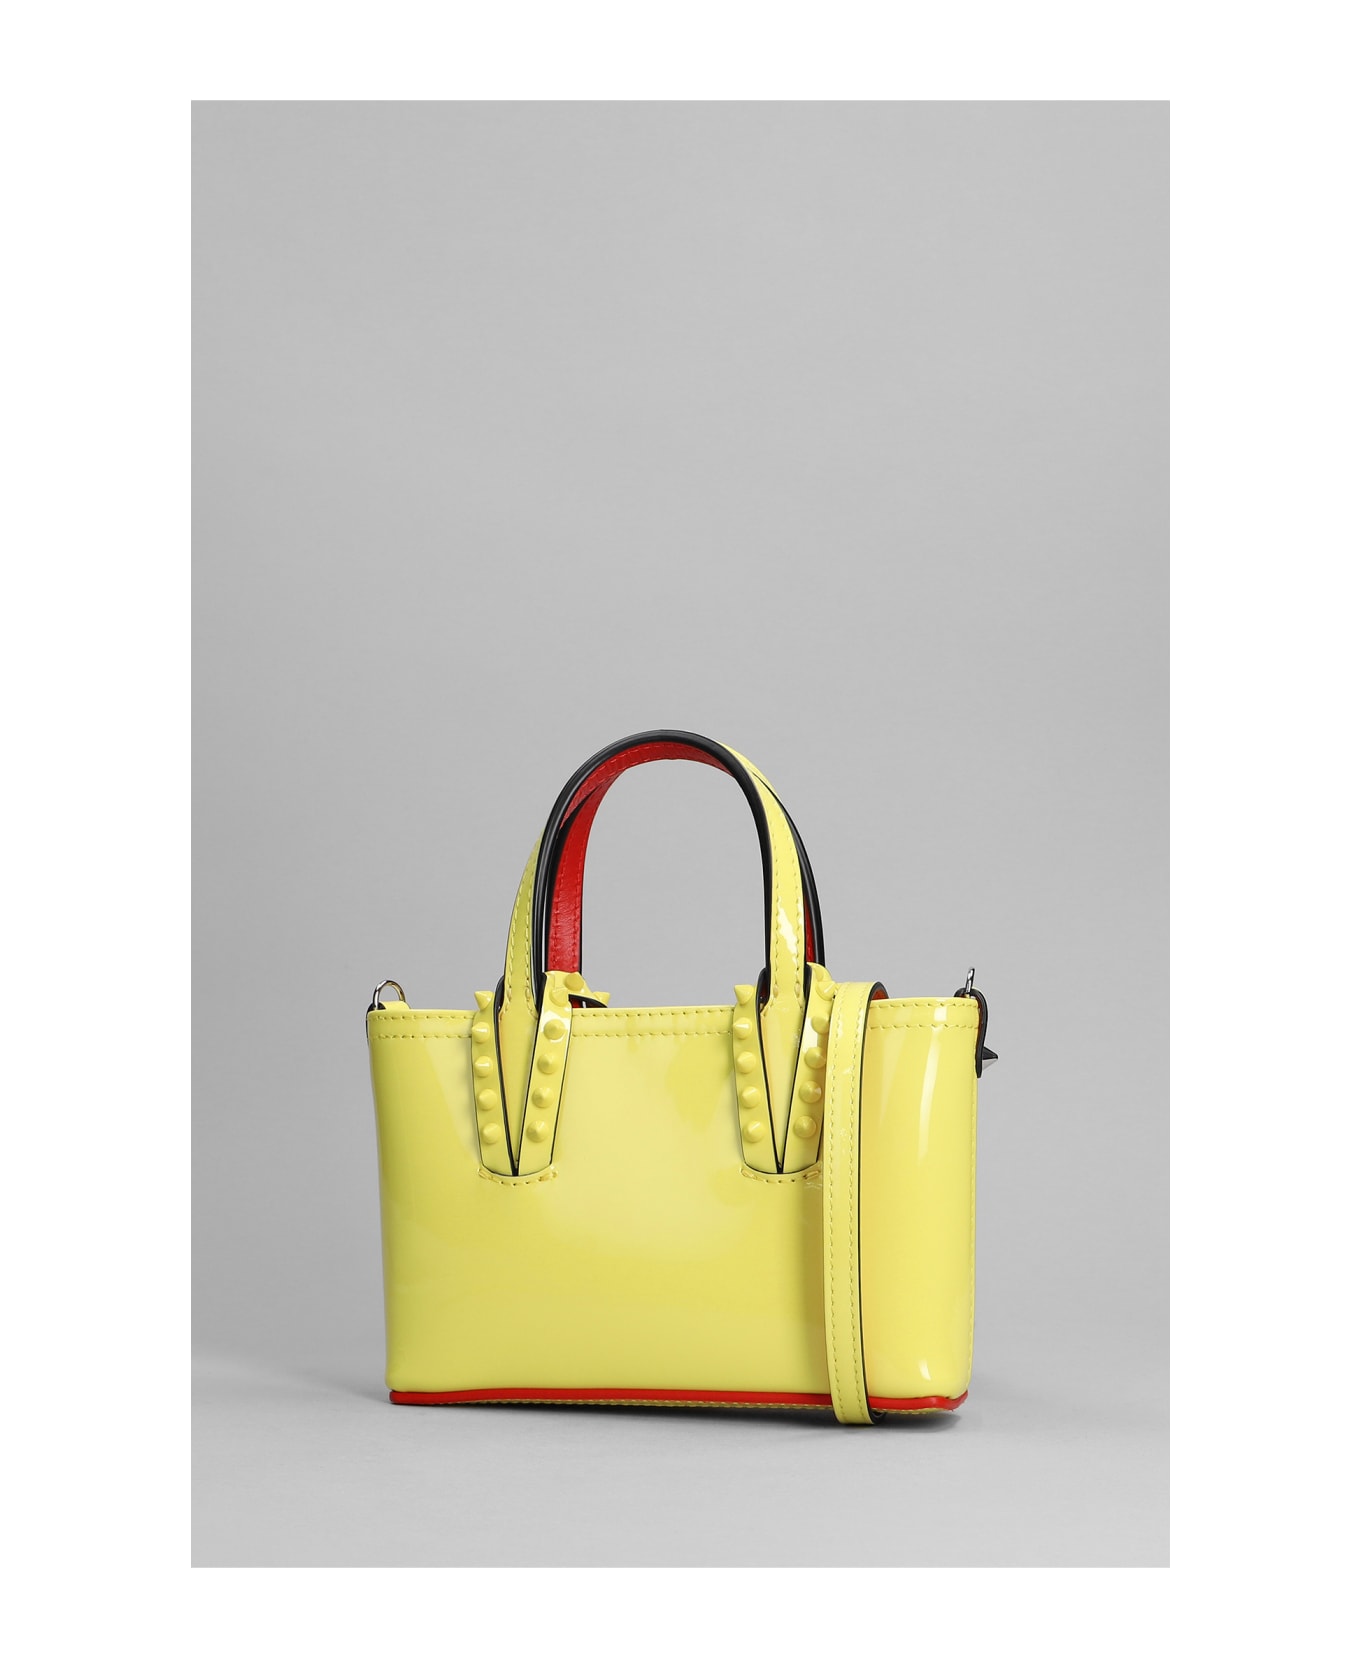 Christian Louboutin Cabata Hand Bag In Yellow Patent Leather - yellow